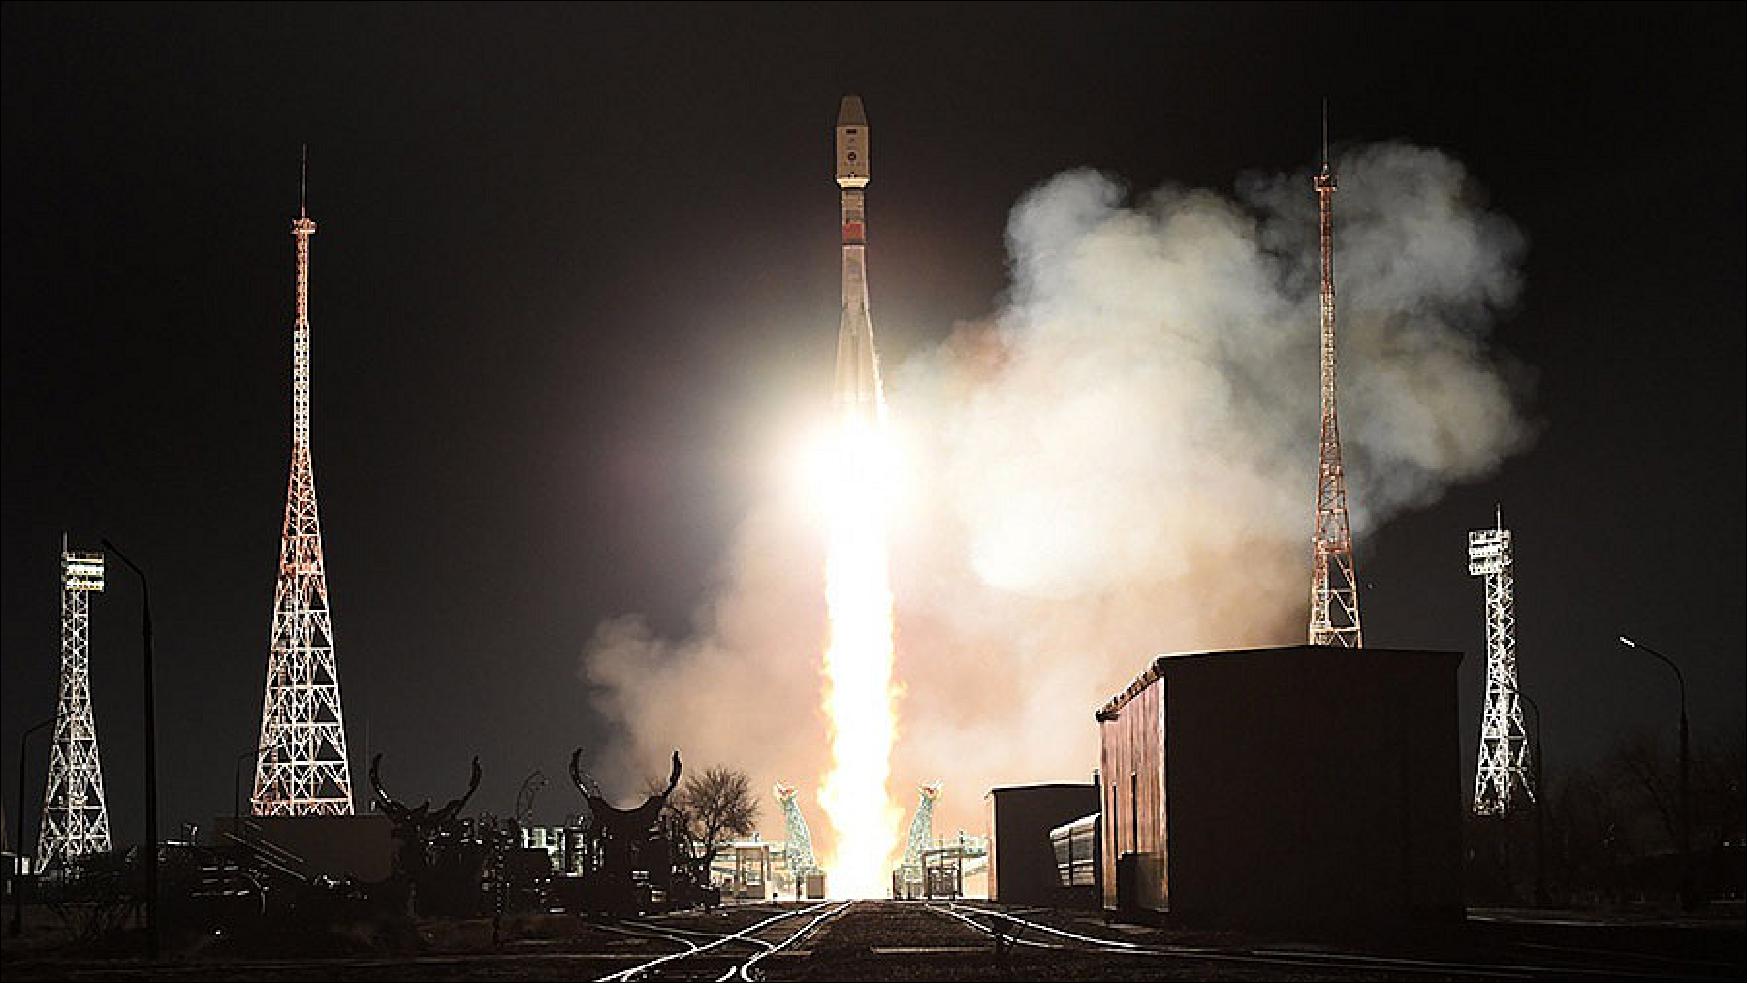 Figure 7: A Russian Progress spacecraft (Soyuz-2 1b) launched from Kazakhstan at 6:06 p.m. Baikonur time (13:06 UTC)) today carrying the Prichal docking module into Earth orbit (image credit: Roscosmos, RKK Energia)